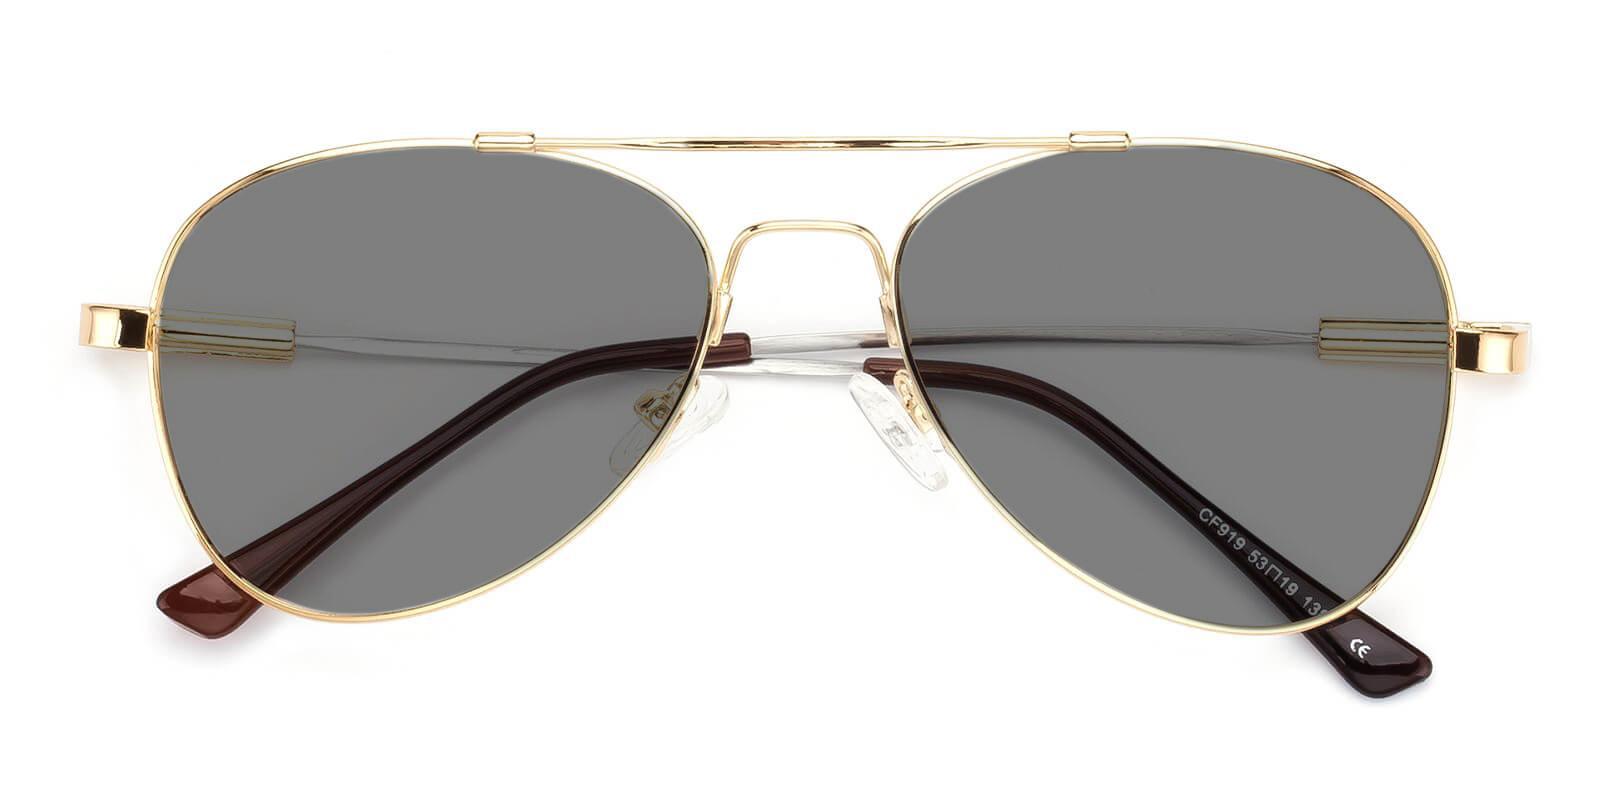 Movement Gold Metal SpringHinges , Sunglasses , NosePads Frames from ABBE Glasses